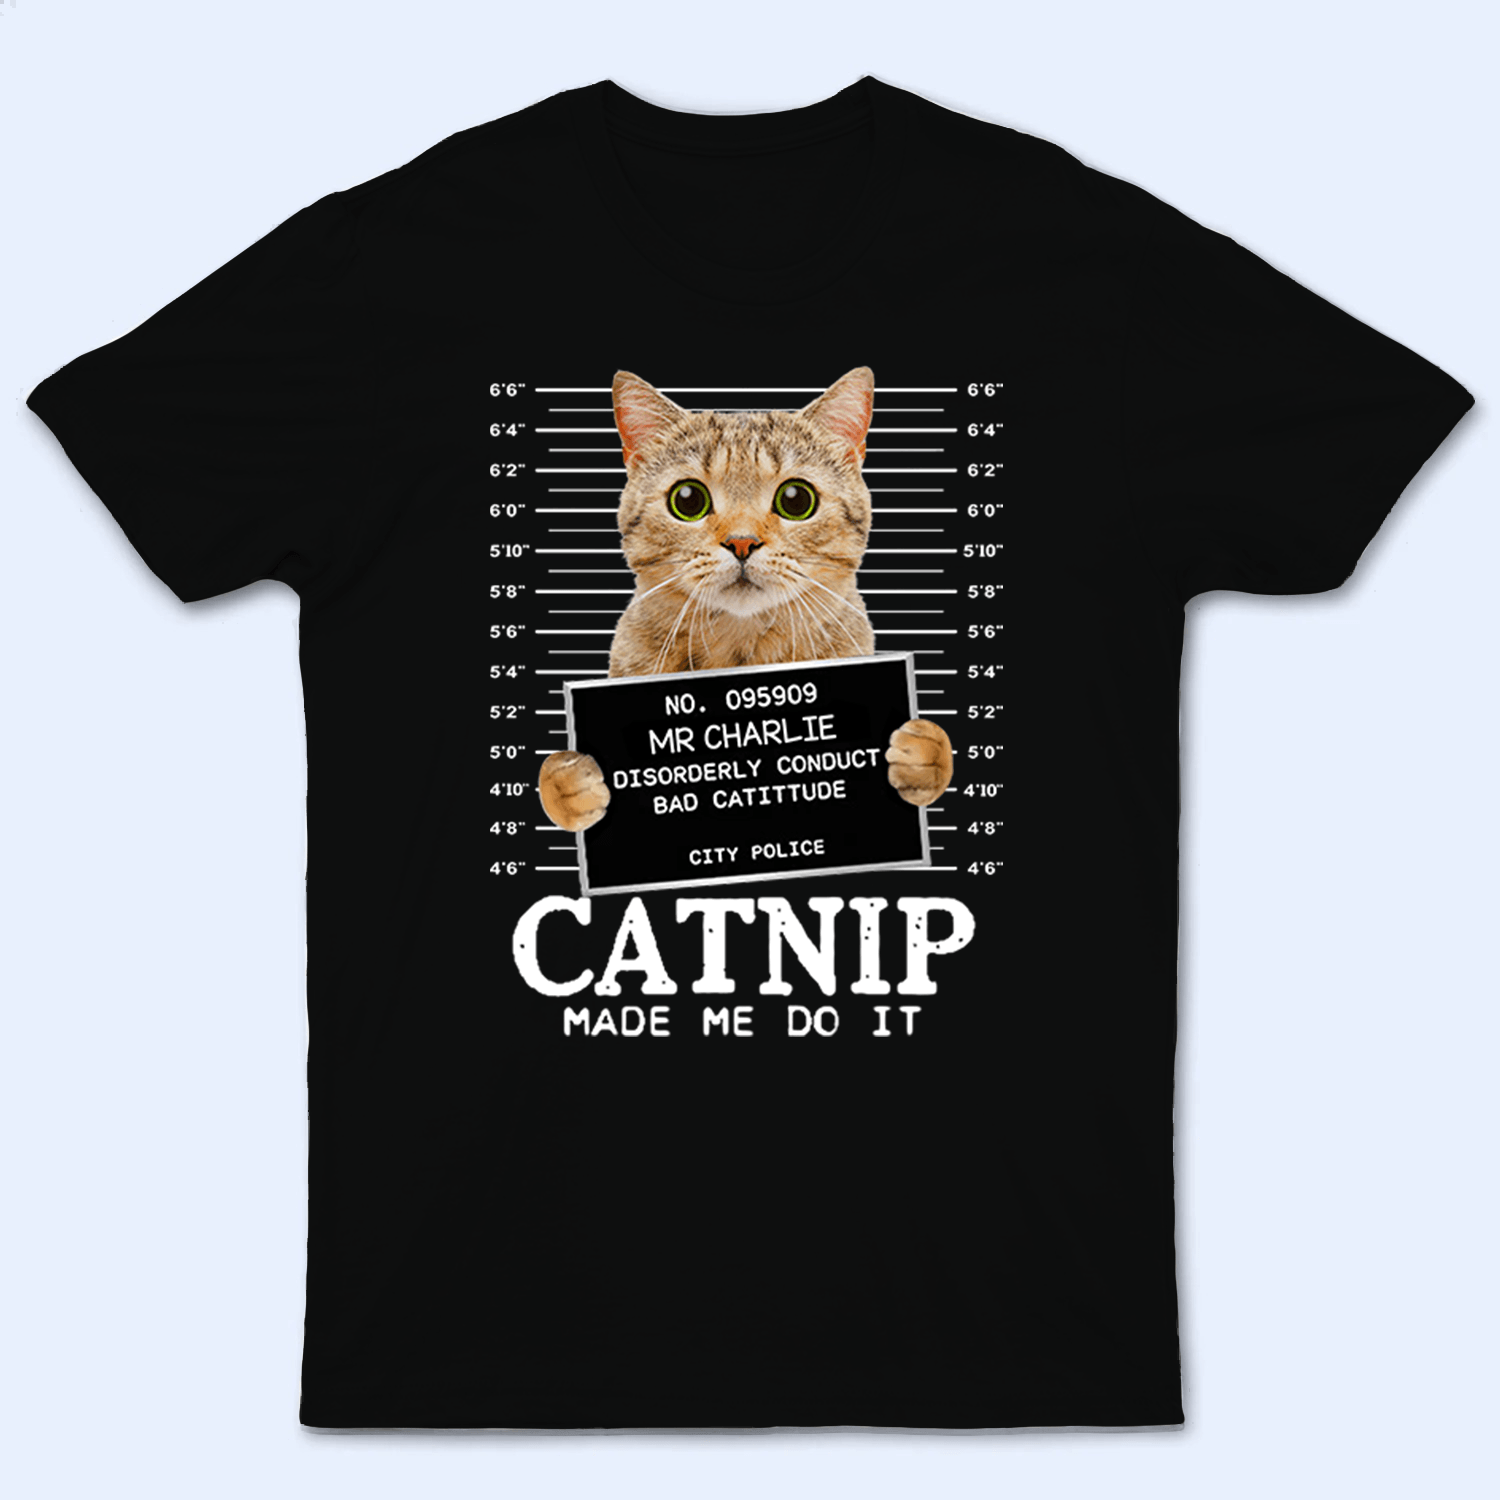 The Catminal - Personalized Custom T Shirt - Birthday, Loving, Funny Gift for Dog Mom, Dog Dad, Dog Lovers, Pet Gifts for Him, Her - Suzitee Store